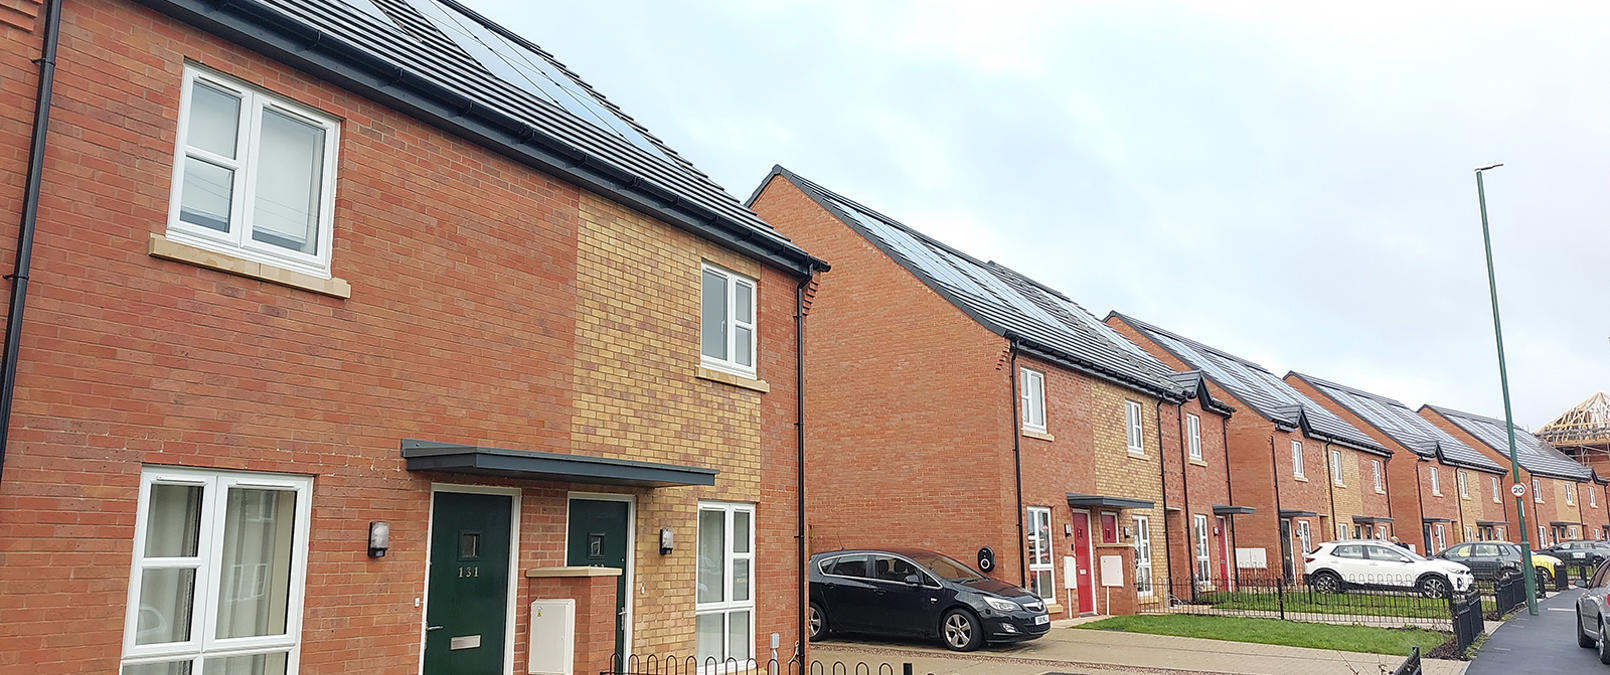 New homes fitted with solar panels